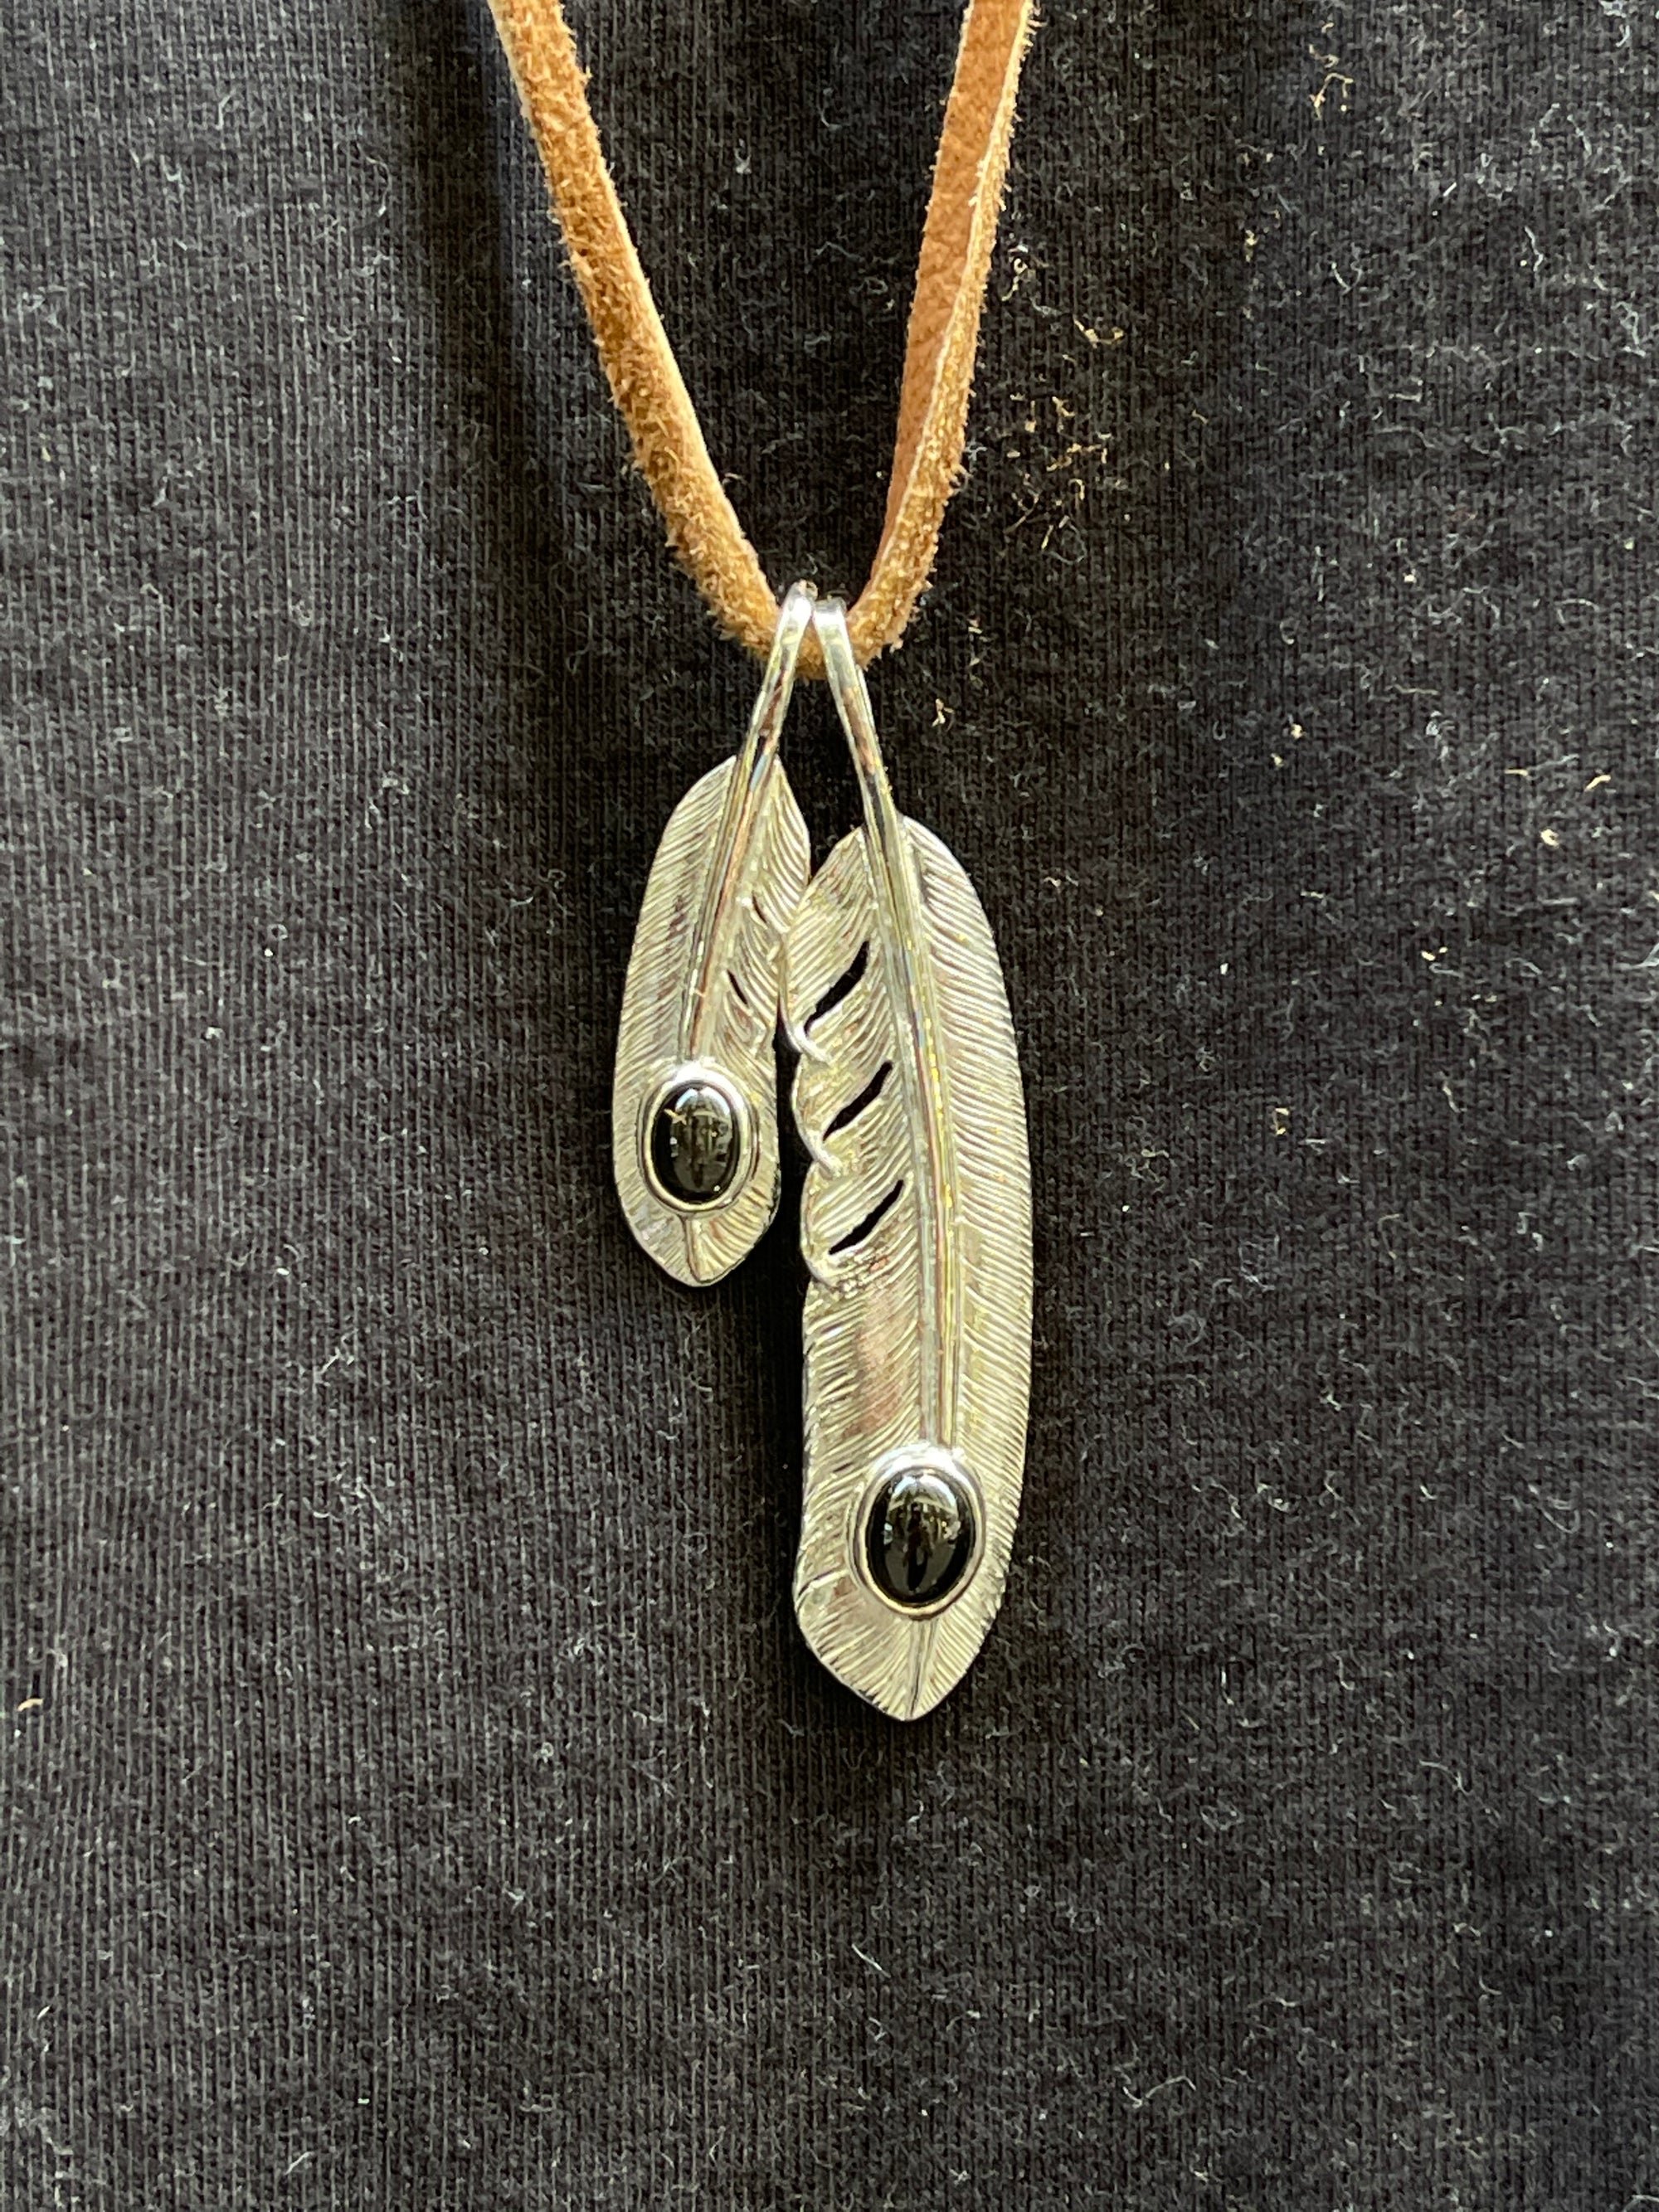 First Arrow's Large "Soulo" Feather Pendant (P-003B)